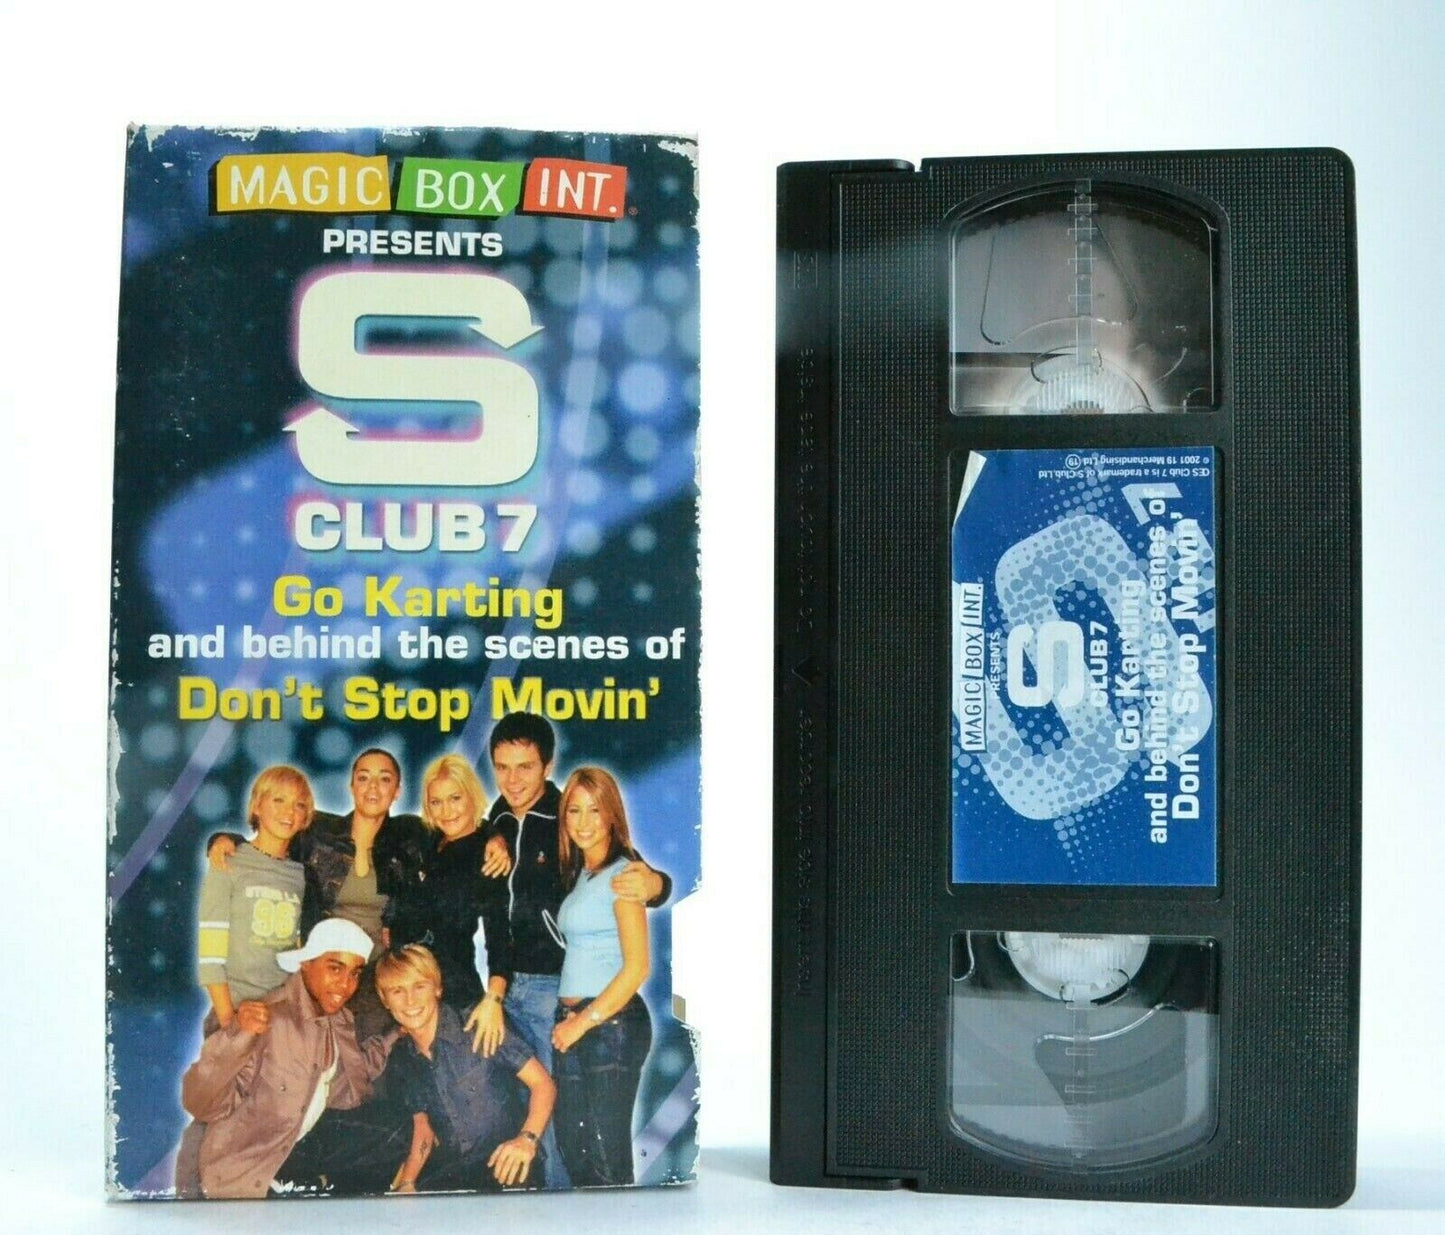 S Club 7: Go Karting - "Don't Stop Movin" Behind The Scenes - Pop Music - VHS-